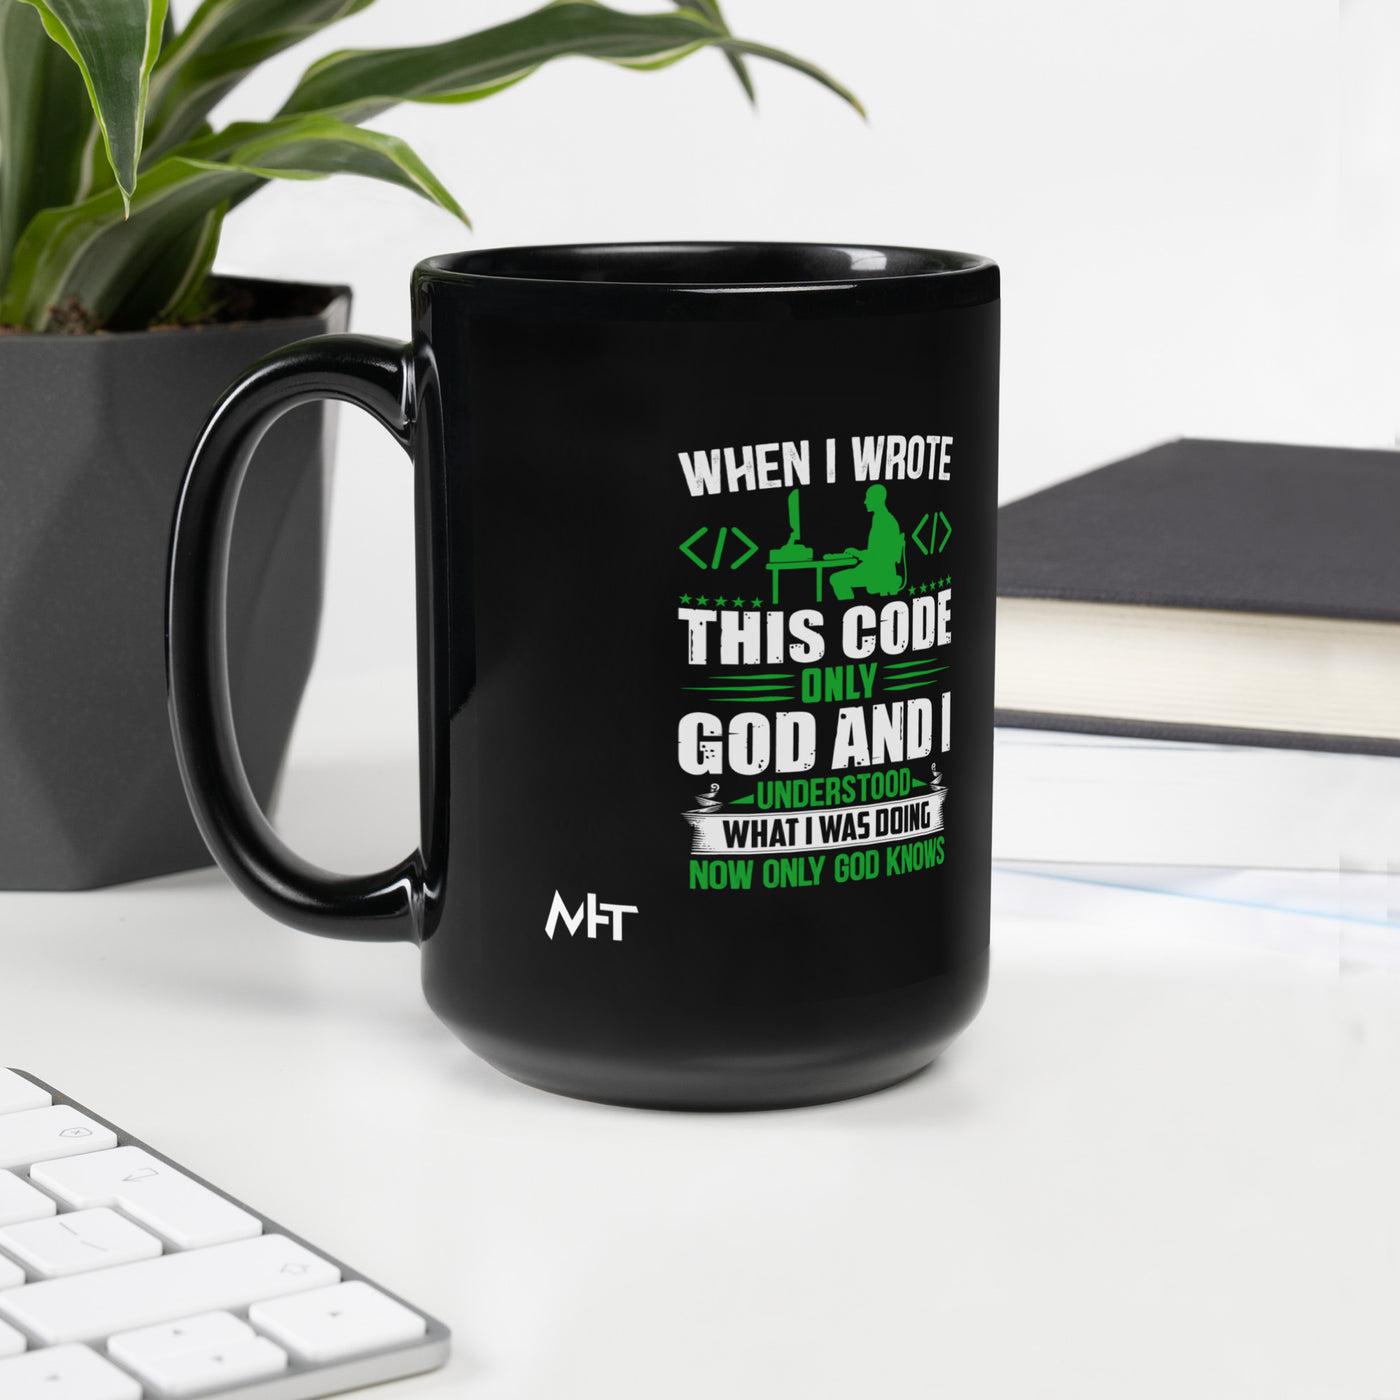 When I Wrote this code, only God and I Understood - Black Glossy Mug